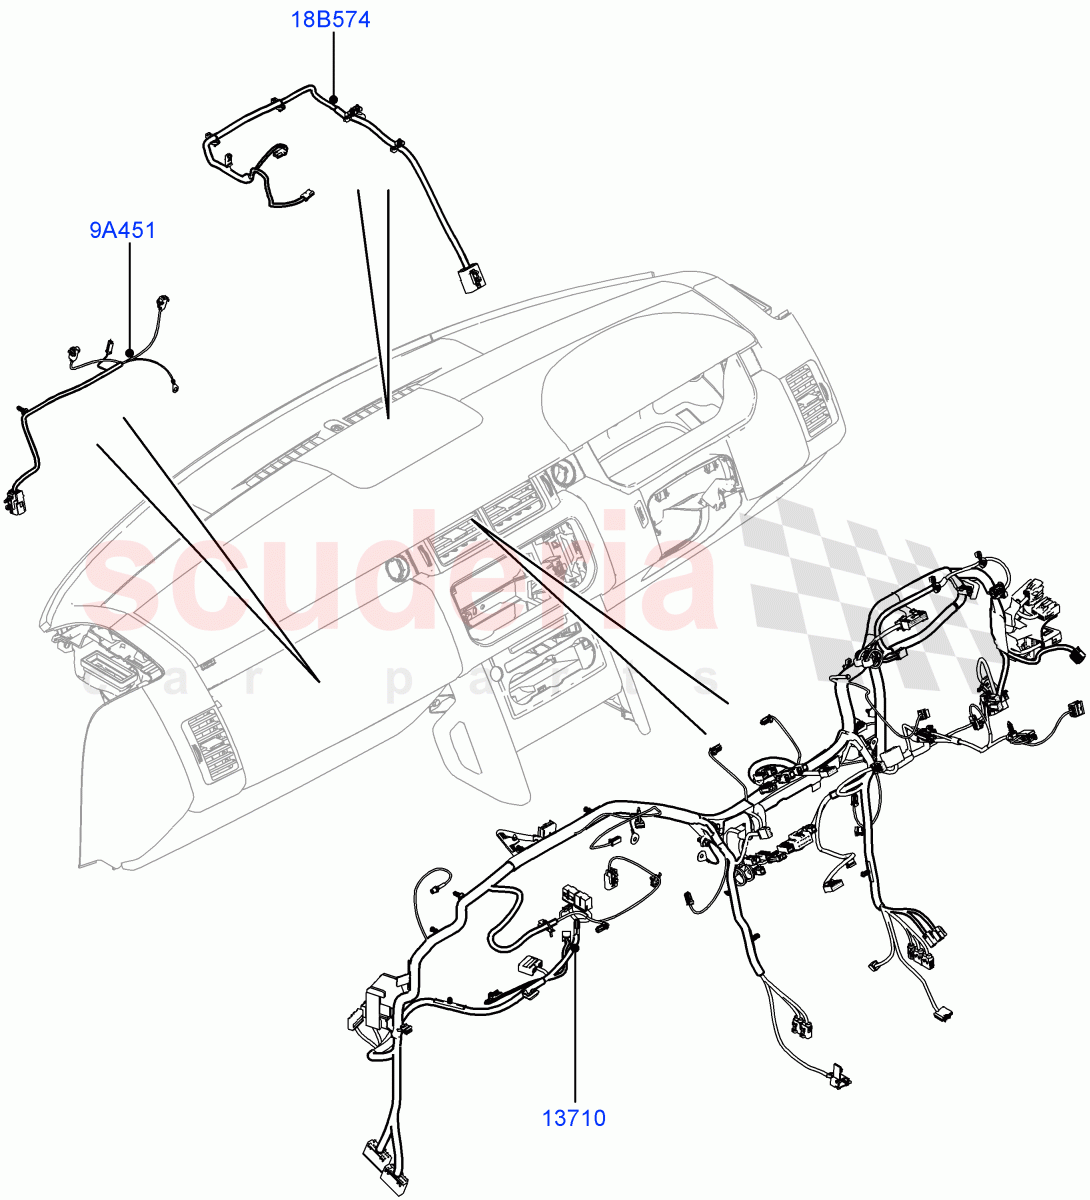 Electrical Wiring - Engine And Dash(Facia)((V)TODA999999) of Land Rover Land Rover Range Rover (2012-2021) [4.4 DOHC Diesel V8 DITC]